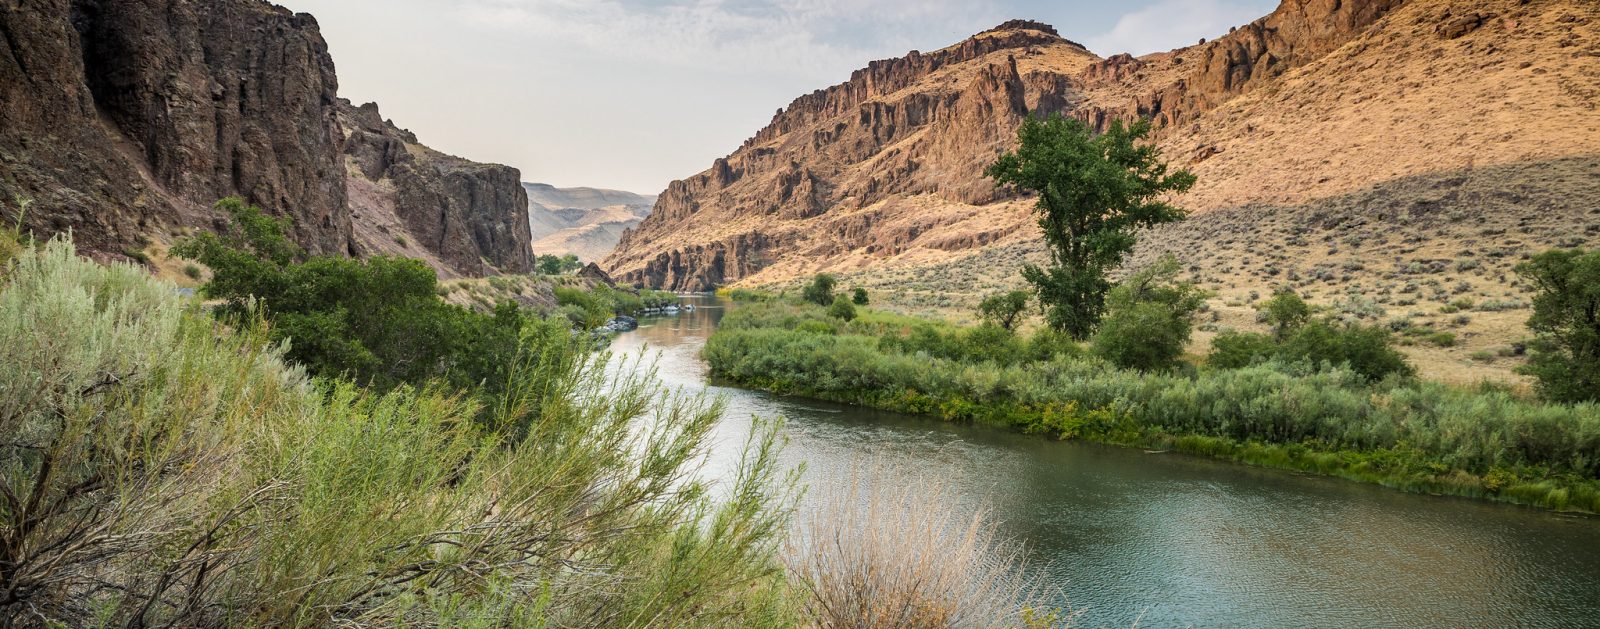 Lower Owyhee Canyon, OR | Photo by by Greg Shine, BLM.